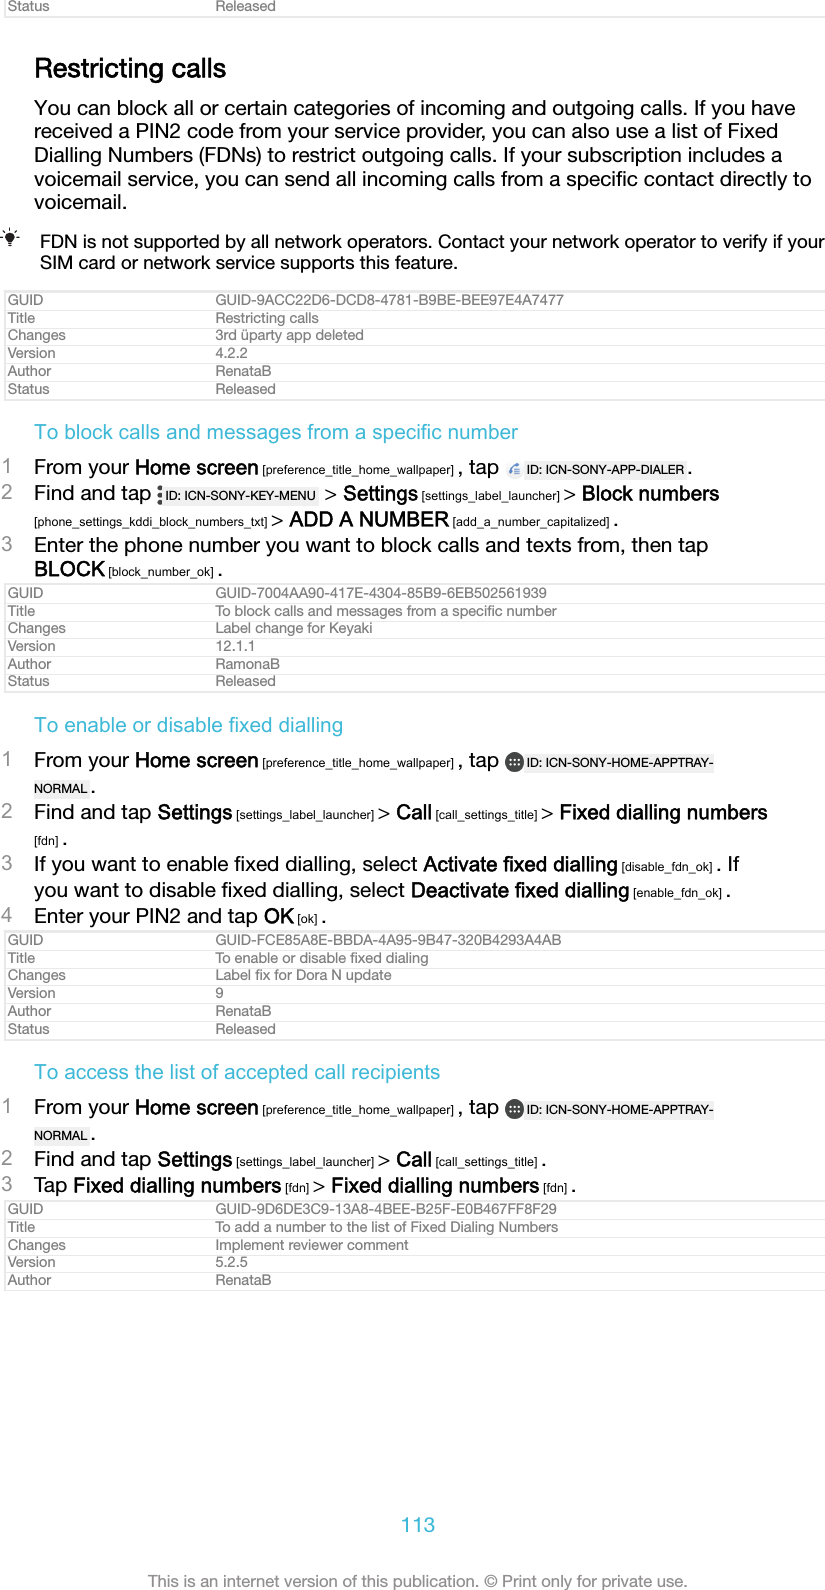 Status ReleasedRestricting callsYou can block all or certain categories of incoming and outgoing calls. If you havereceived a PIN2 code from your service provider, you can also use a list of FixedDialling Numbers (FDNs) to restrict outgoing calls. If your subscription includes avoicemail service, you can send all incoming calls from a speciﬁc contact directly tovoicemail.FDN is not supported by all network operators. Contact your network operator to verify if yourSIM card or network service supports this feature.GUID GUID-9ACC22D6-DCD8-4781-B9BE-BEE97E4A7477Title Restricting callsChanges 3rd üparty app deletedVersion 4.2.2Author RenataBStatus ReleasedTo block calls and messages from a specific number1From your Home screen [preference_title_home_wallpaper] , tap  ID: ICN-SONY-APP-DIALER .2Find and tap  ID: ICN-SONY-KEY-MENU  &gt; Settings [settings_label_launcher] &gt; Block numbers[phone_settings_kddi_block_numbers_txt] &gt; ADD A NUMBER [add_a_number_capitalized] .3Enter the phone number you want to block calls and texts from, then tapBLOCK [block_number_ok] .GUID GUID-7004AA90-417E-4304-85B9-6EB502561939Title To block calls and messages from a speciﬁc numberChanges Label change for KeyakiVersion 12.1.1Author RamonaBStatus ReleasedTo enable or disable fixed dialling1From your Home screen [preference_title_home_wallpaper] , tap  ID: ICN-SONY-HOME-APPTRAY-NORMAL .2Find and tap Settings [settings_label_launcher] &gt; Call [call_settings_title] &gt; Fixed dialling numbers[fdn] .3If you want to enable ﬁxed dialling, select Activate fixed dialling [disable_fdn_ok] . Ifyou want to disable ﬁxed dialling, select Deactivate fixed dialling [enable_fdn_ok] .4Enter your PIN2 and tap OK [ok] .GUID GUID-FCE85A8E-BBDA-4A95-9B47-320B4293A4ABTitle To enable or disable ﬁxed dialingChanges Label ﬁx for Dora N updateVersion 9Author RenataBStatus ReleasedTo access the list of accepted call recipients1From your Home screen [preference_title_home_wallpaper] , tap  ID: ICN-SONY-HOME-APPTRAY-NORMAL .2Find and tap Settings [settings_label_launcher] &gt; Call [call_settings_title] .3Tap Fixed dialling numbers [fdn] &gt; Fixed dialling numbers [fdn] .GUID GUID-9D6DE3C9-13A8-4BEE-B25F-E0B467FF8F29Title To add a number to the list of Fixed Dialing NumbersChanges Implement reviewer commentVersion 5.2.5Author RenataB113This is an internet version of this publication. © Print only for private use.